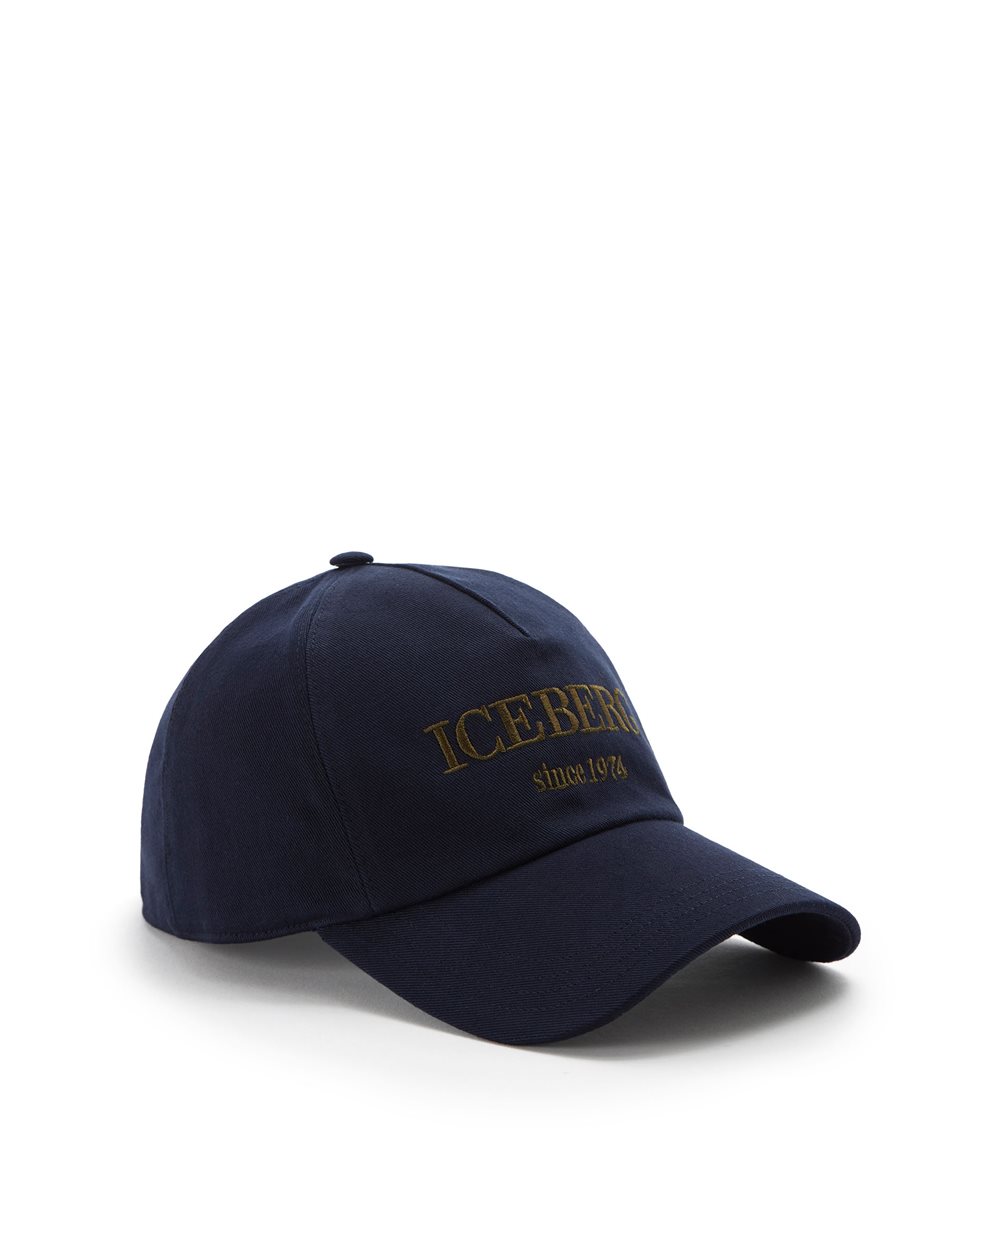 Baseball hat with logo - Accessories | Iceberg - Official Website